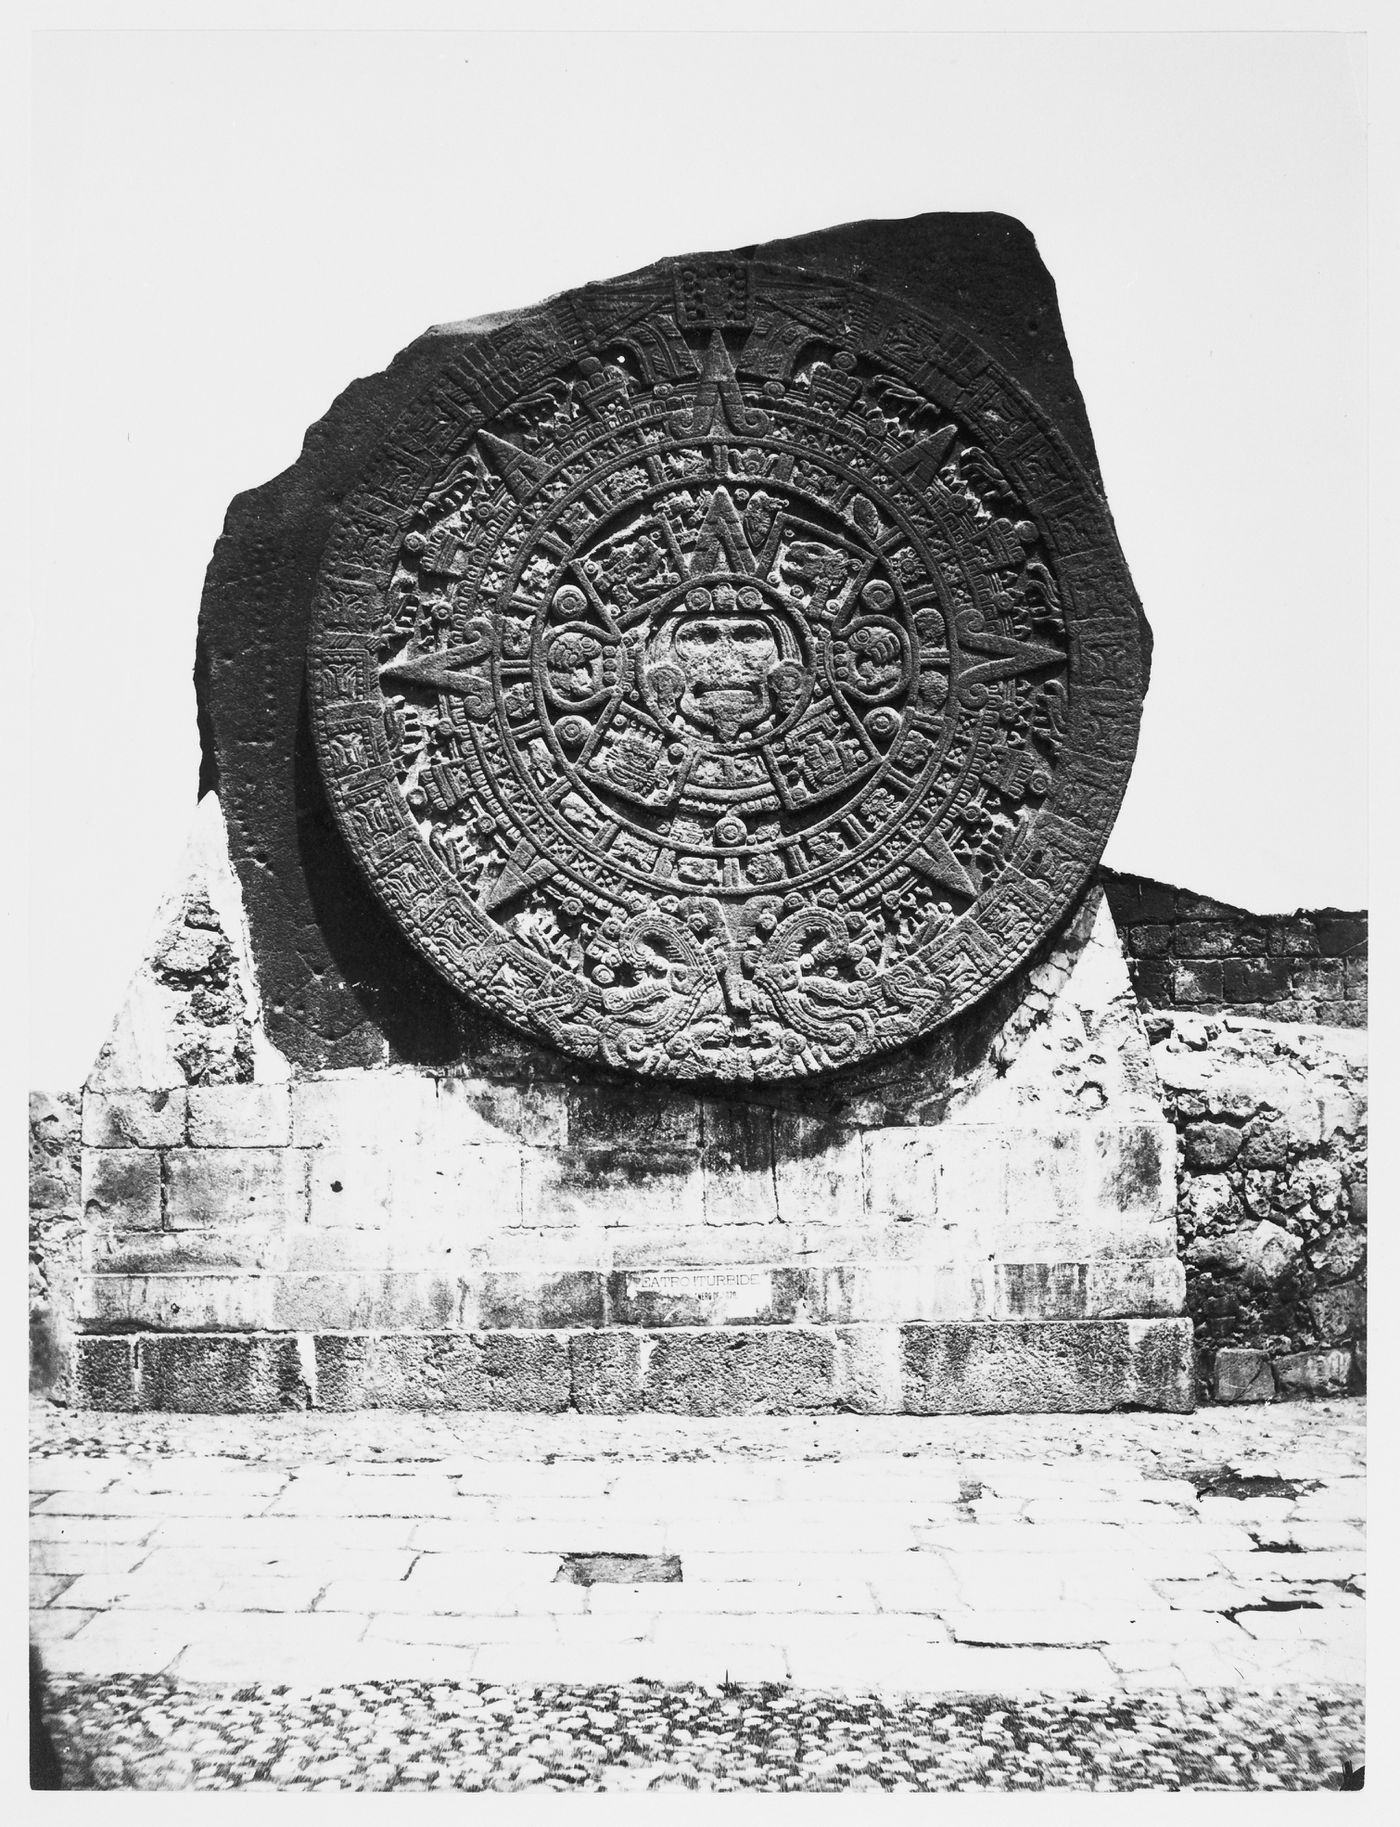 View of the Aztec Calendar Stone outside the National Museum, Mexico City, Mexico